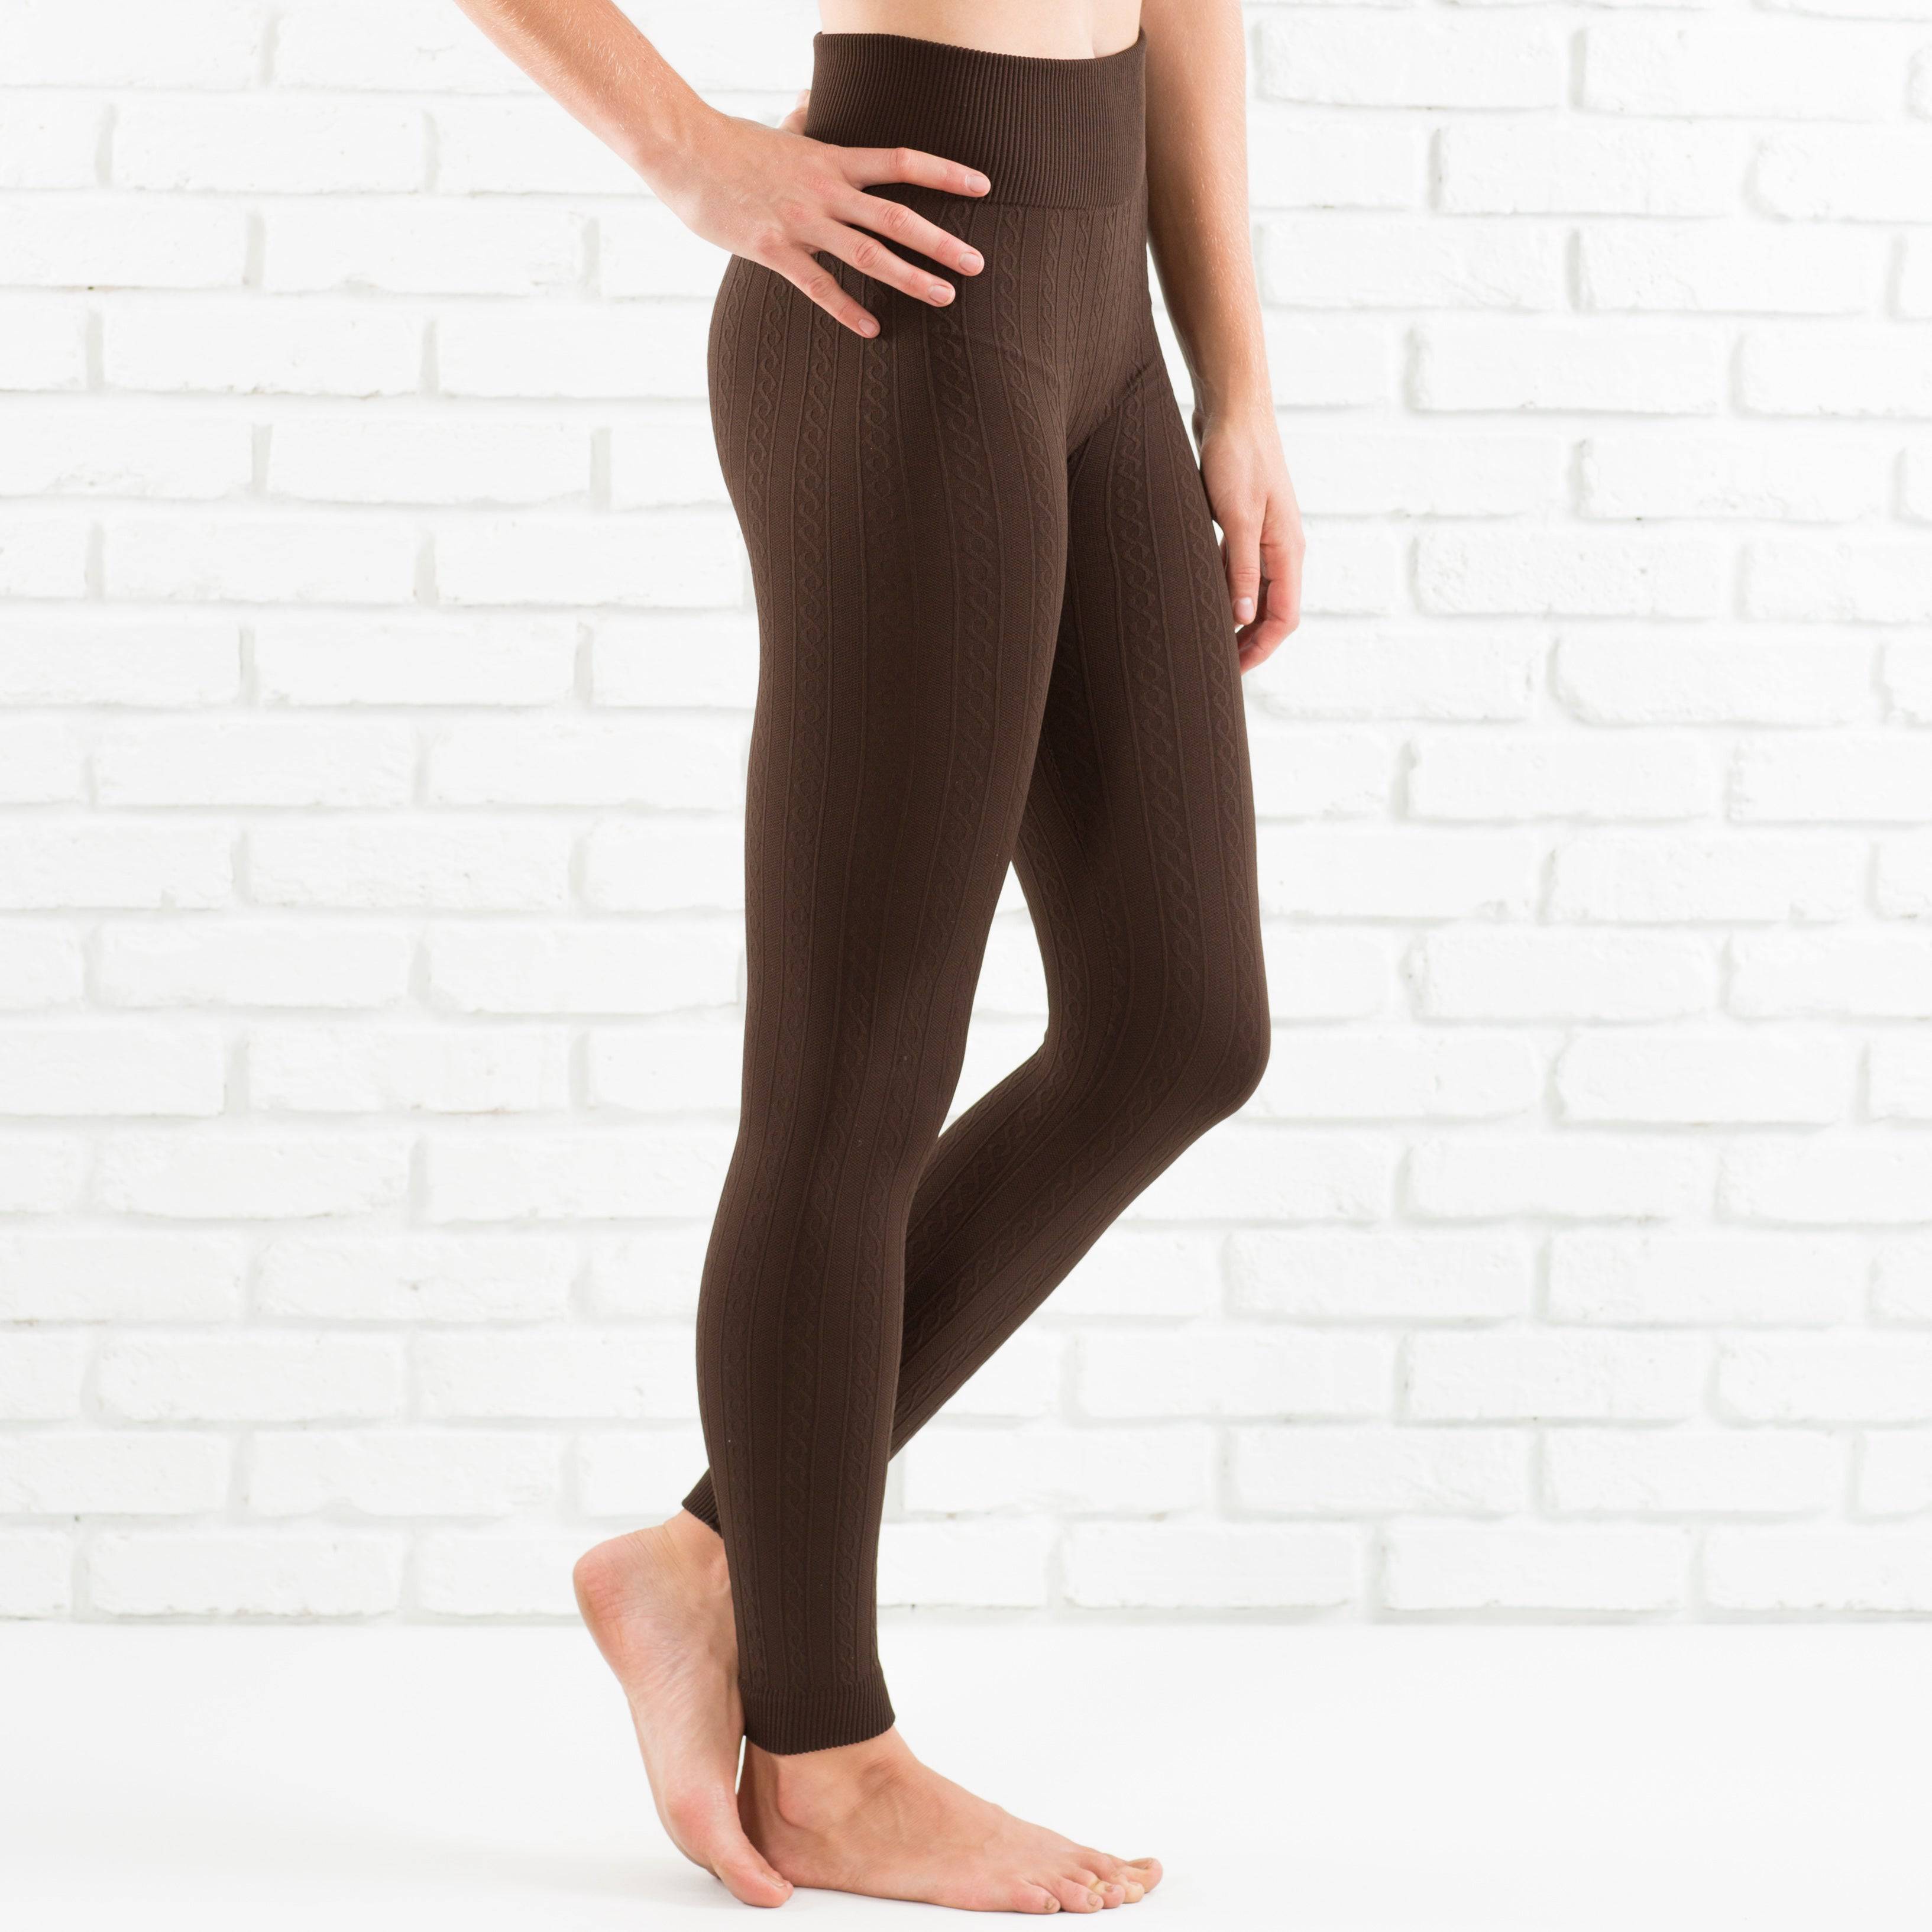 Fleece-Lined Cable Leggings #anthropologie